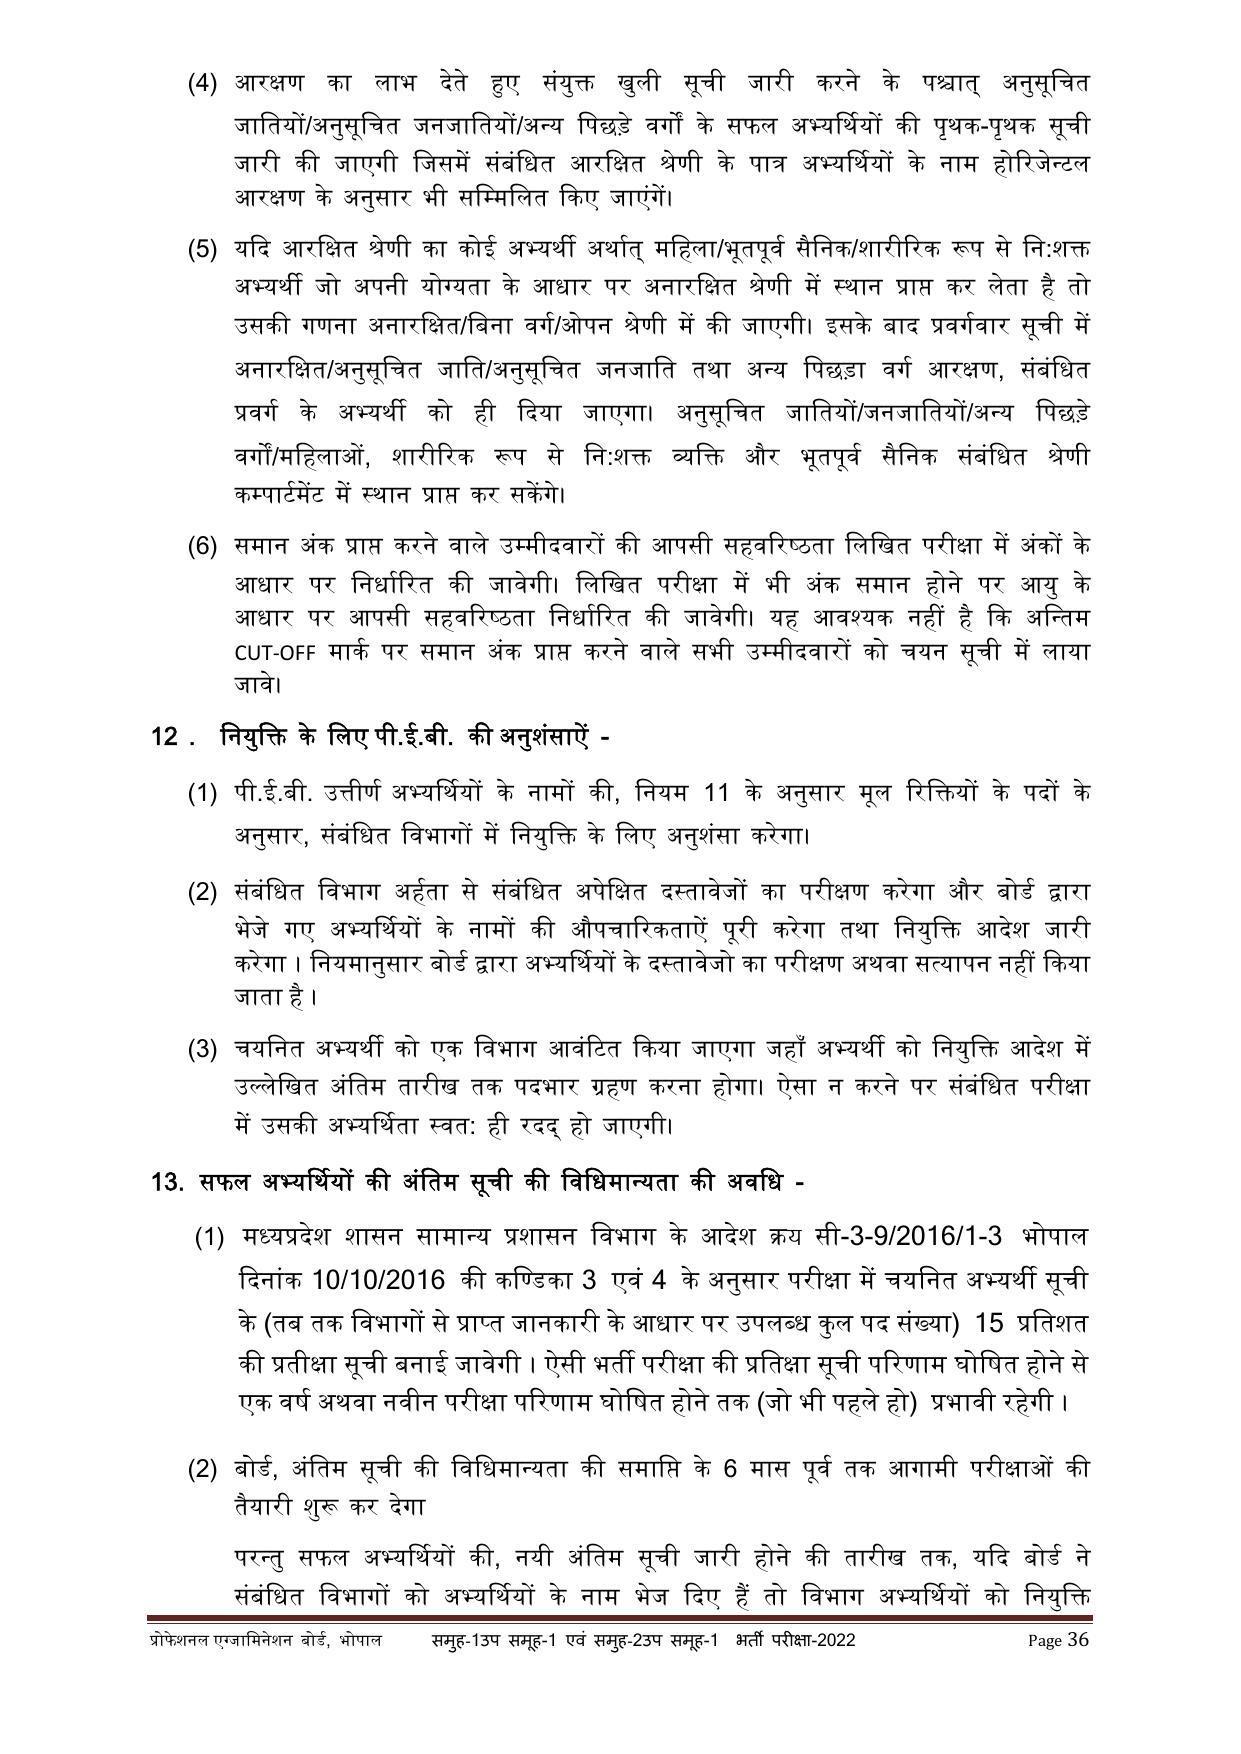 MPPEB Group-I Sub Group-I & Group-II Sub Group-I Recruitment 2022 - Page 21